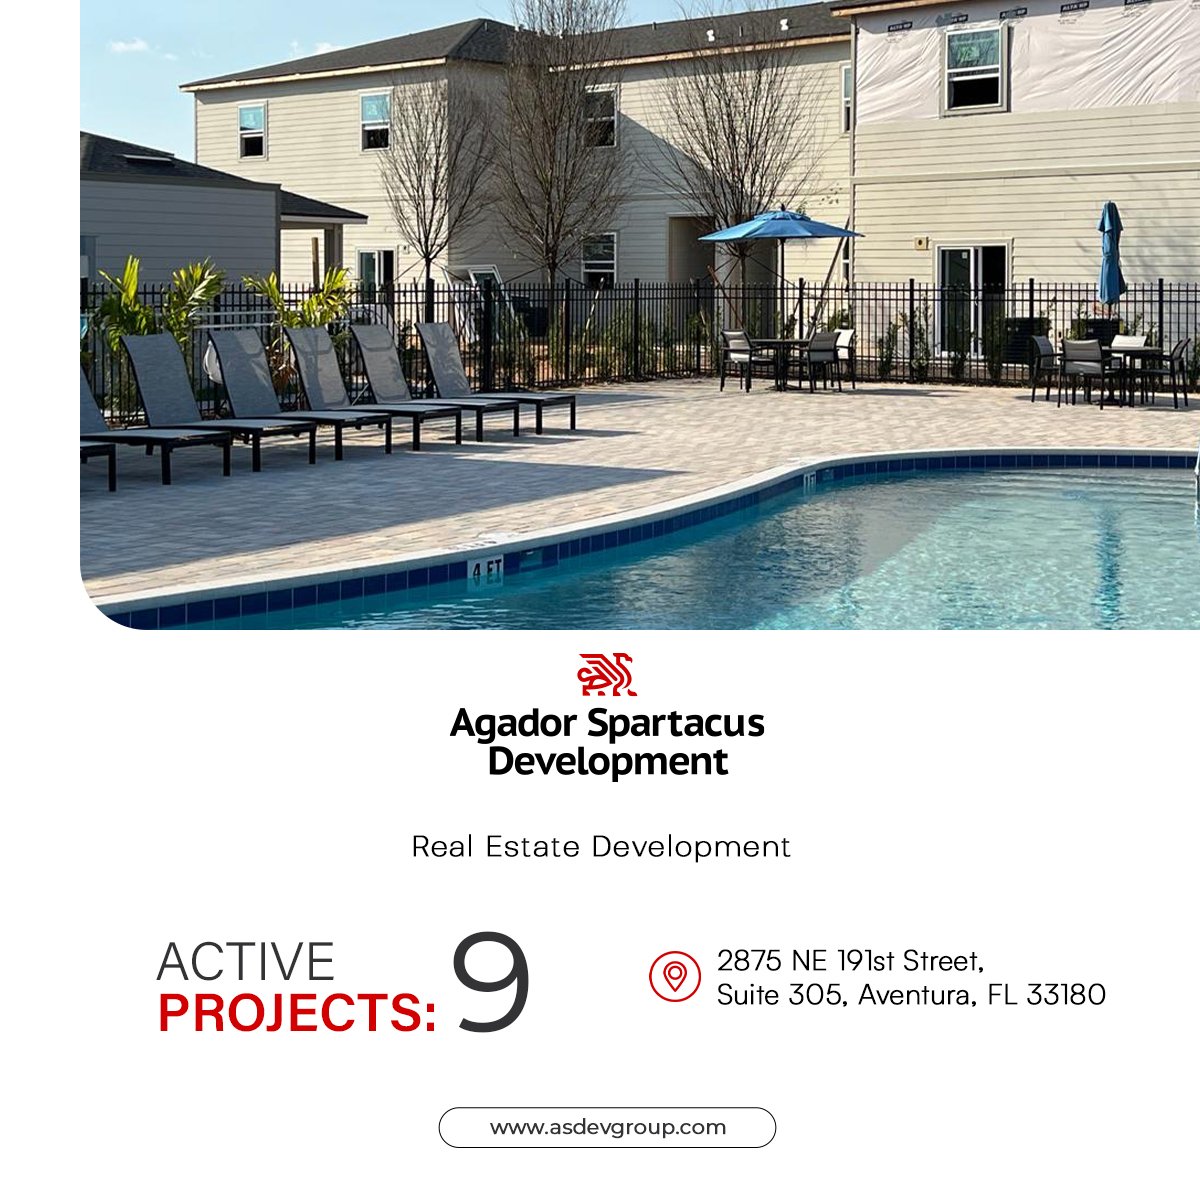 Agador Spartacus Development, the company with the most attractive projects under construction in Florida. ​

#BuildingUniqueExperiences​

hubs.ly/Q02tgDyT0​

 #AgadorSpartacusDevelopment ​

#RealEstate #Invest #RealEstateDevelopment #Developed #Florida #BuildTorent #BFR